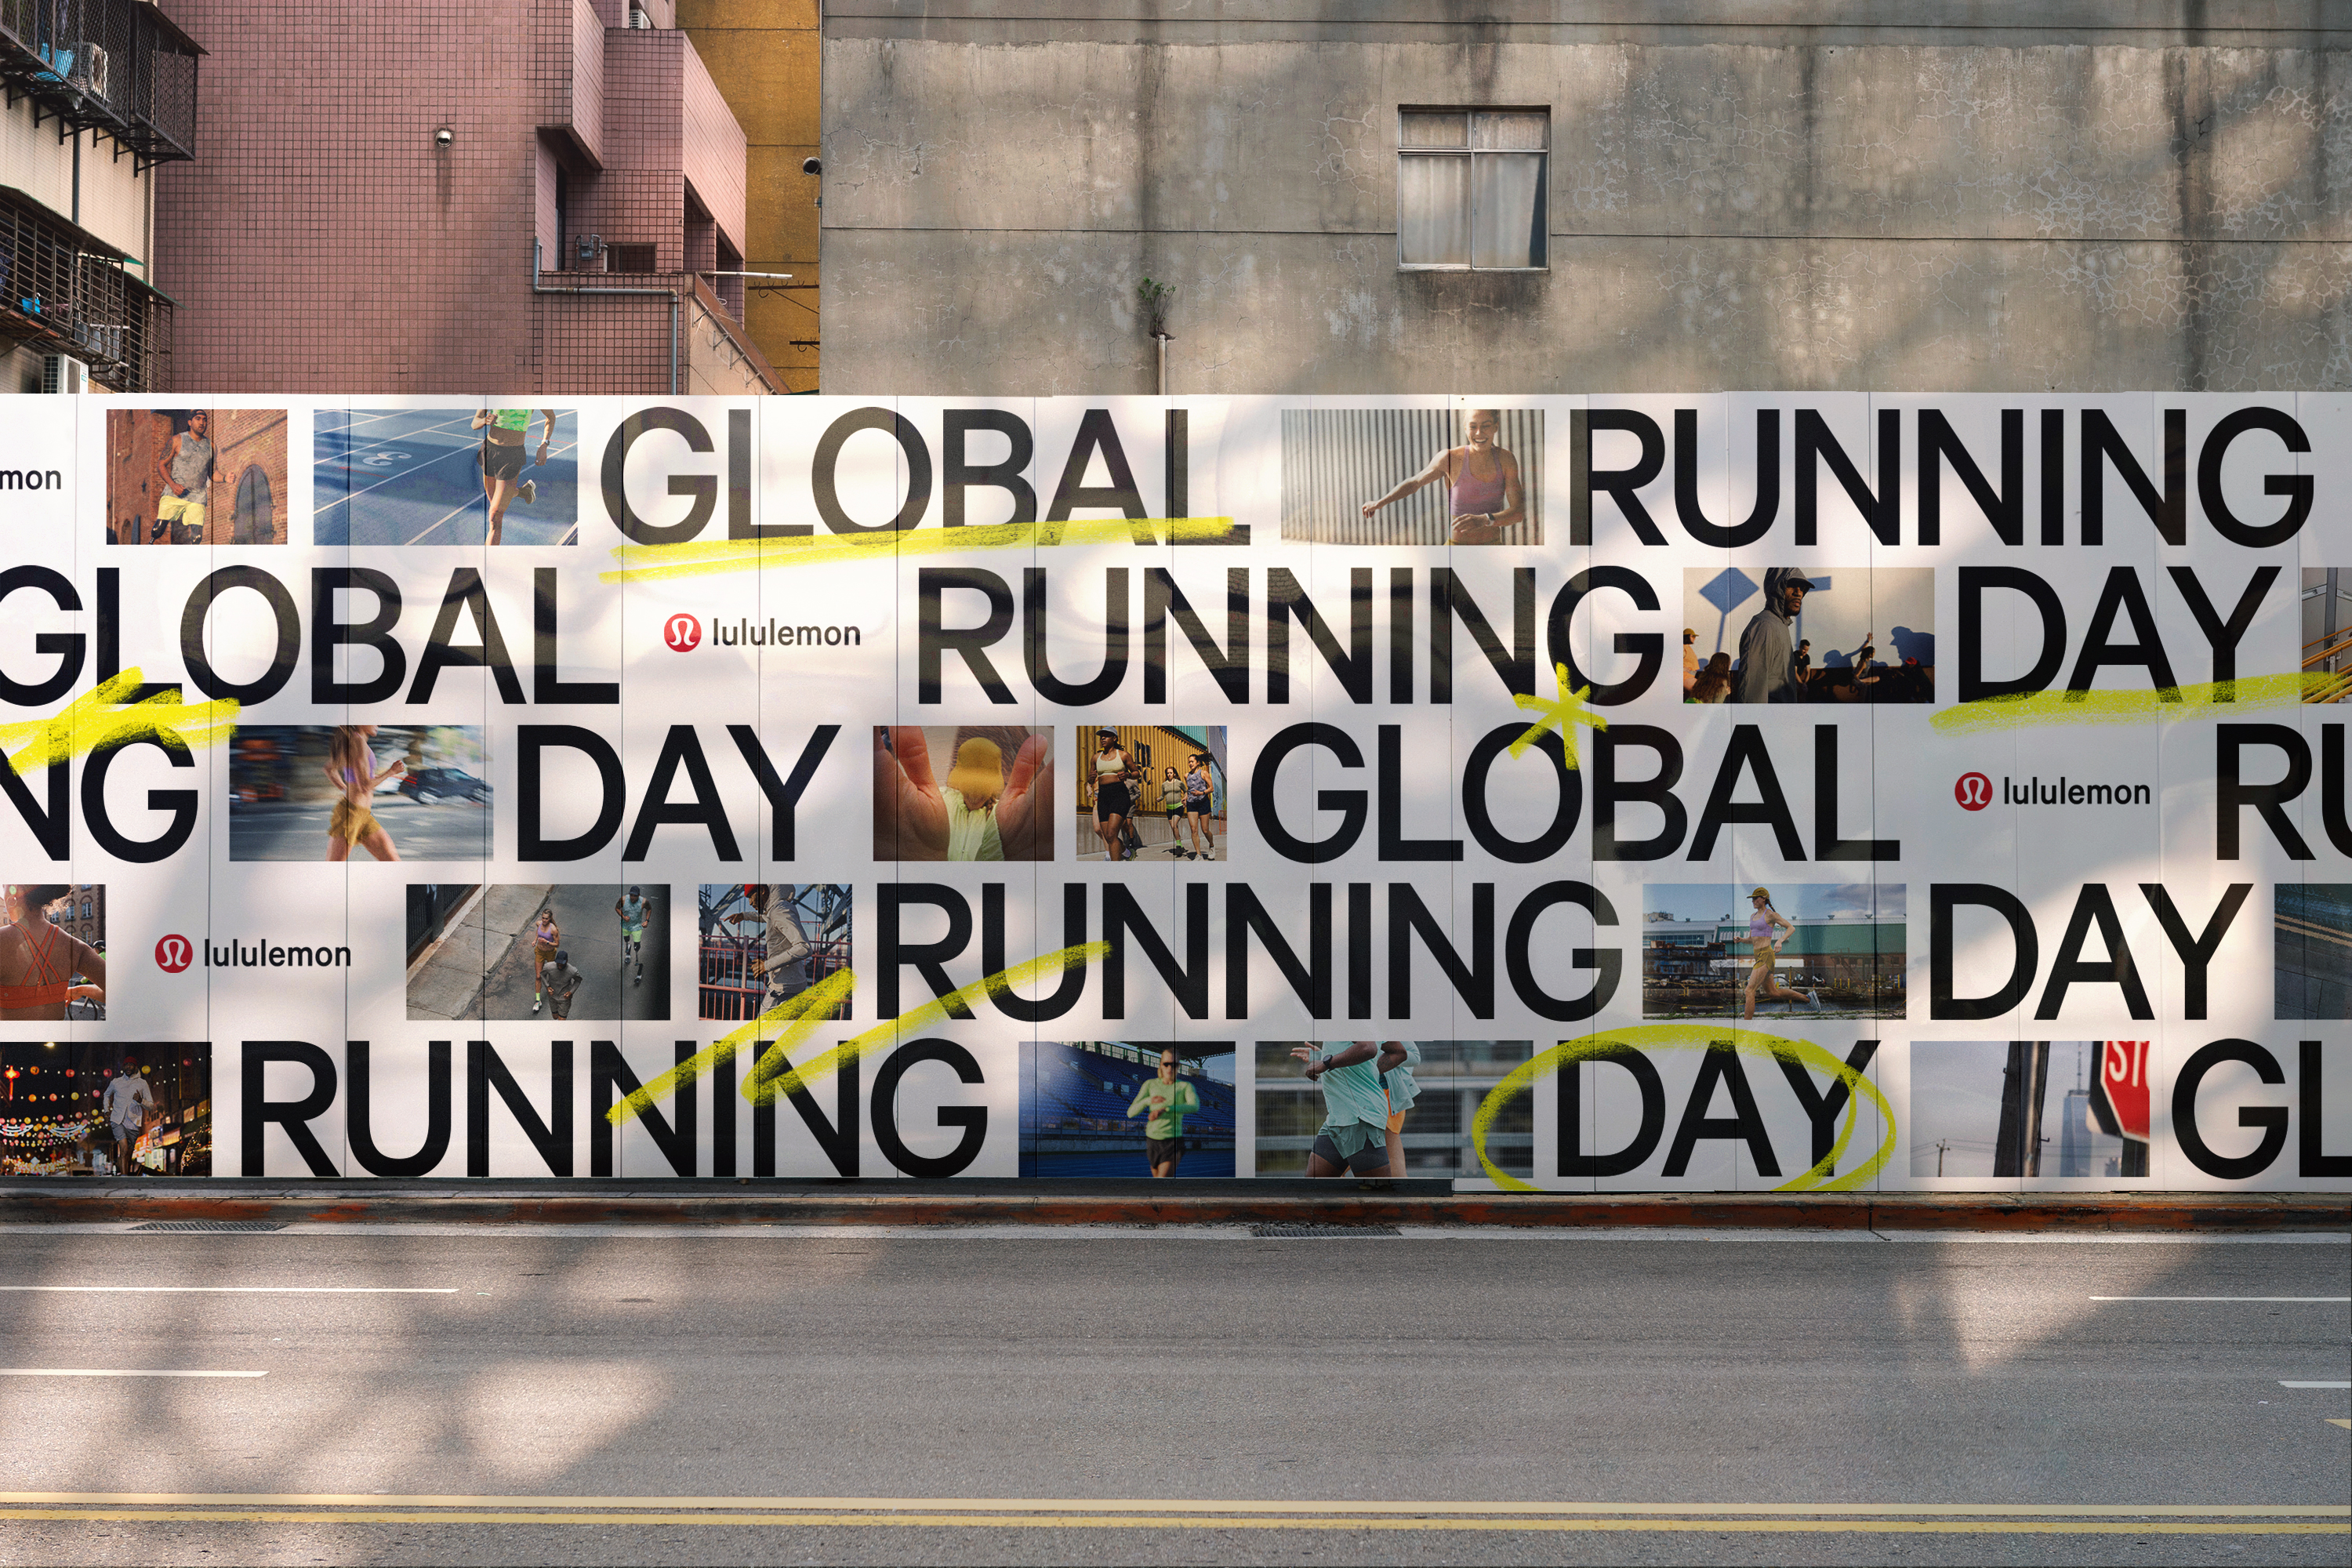 Go All Out on Global Running Day